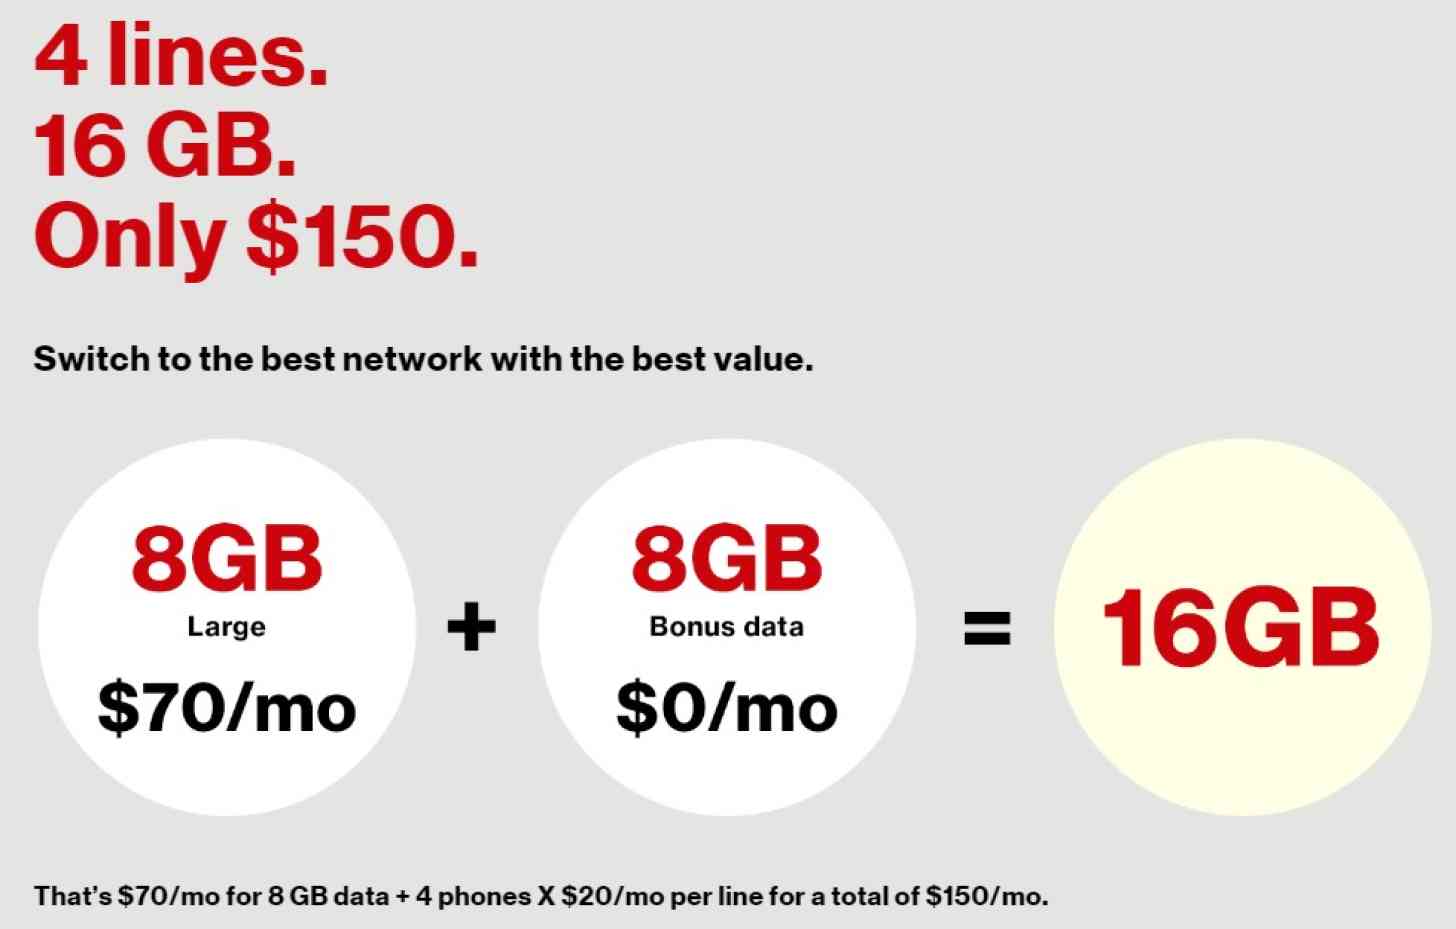 Verizon Wireless offers new 4line family plan with 16GB data per month